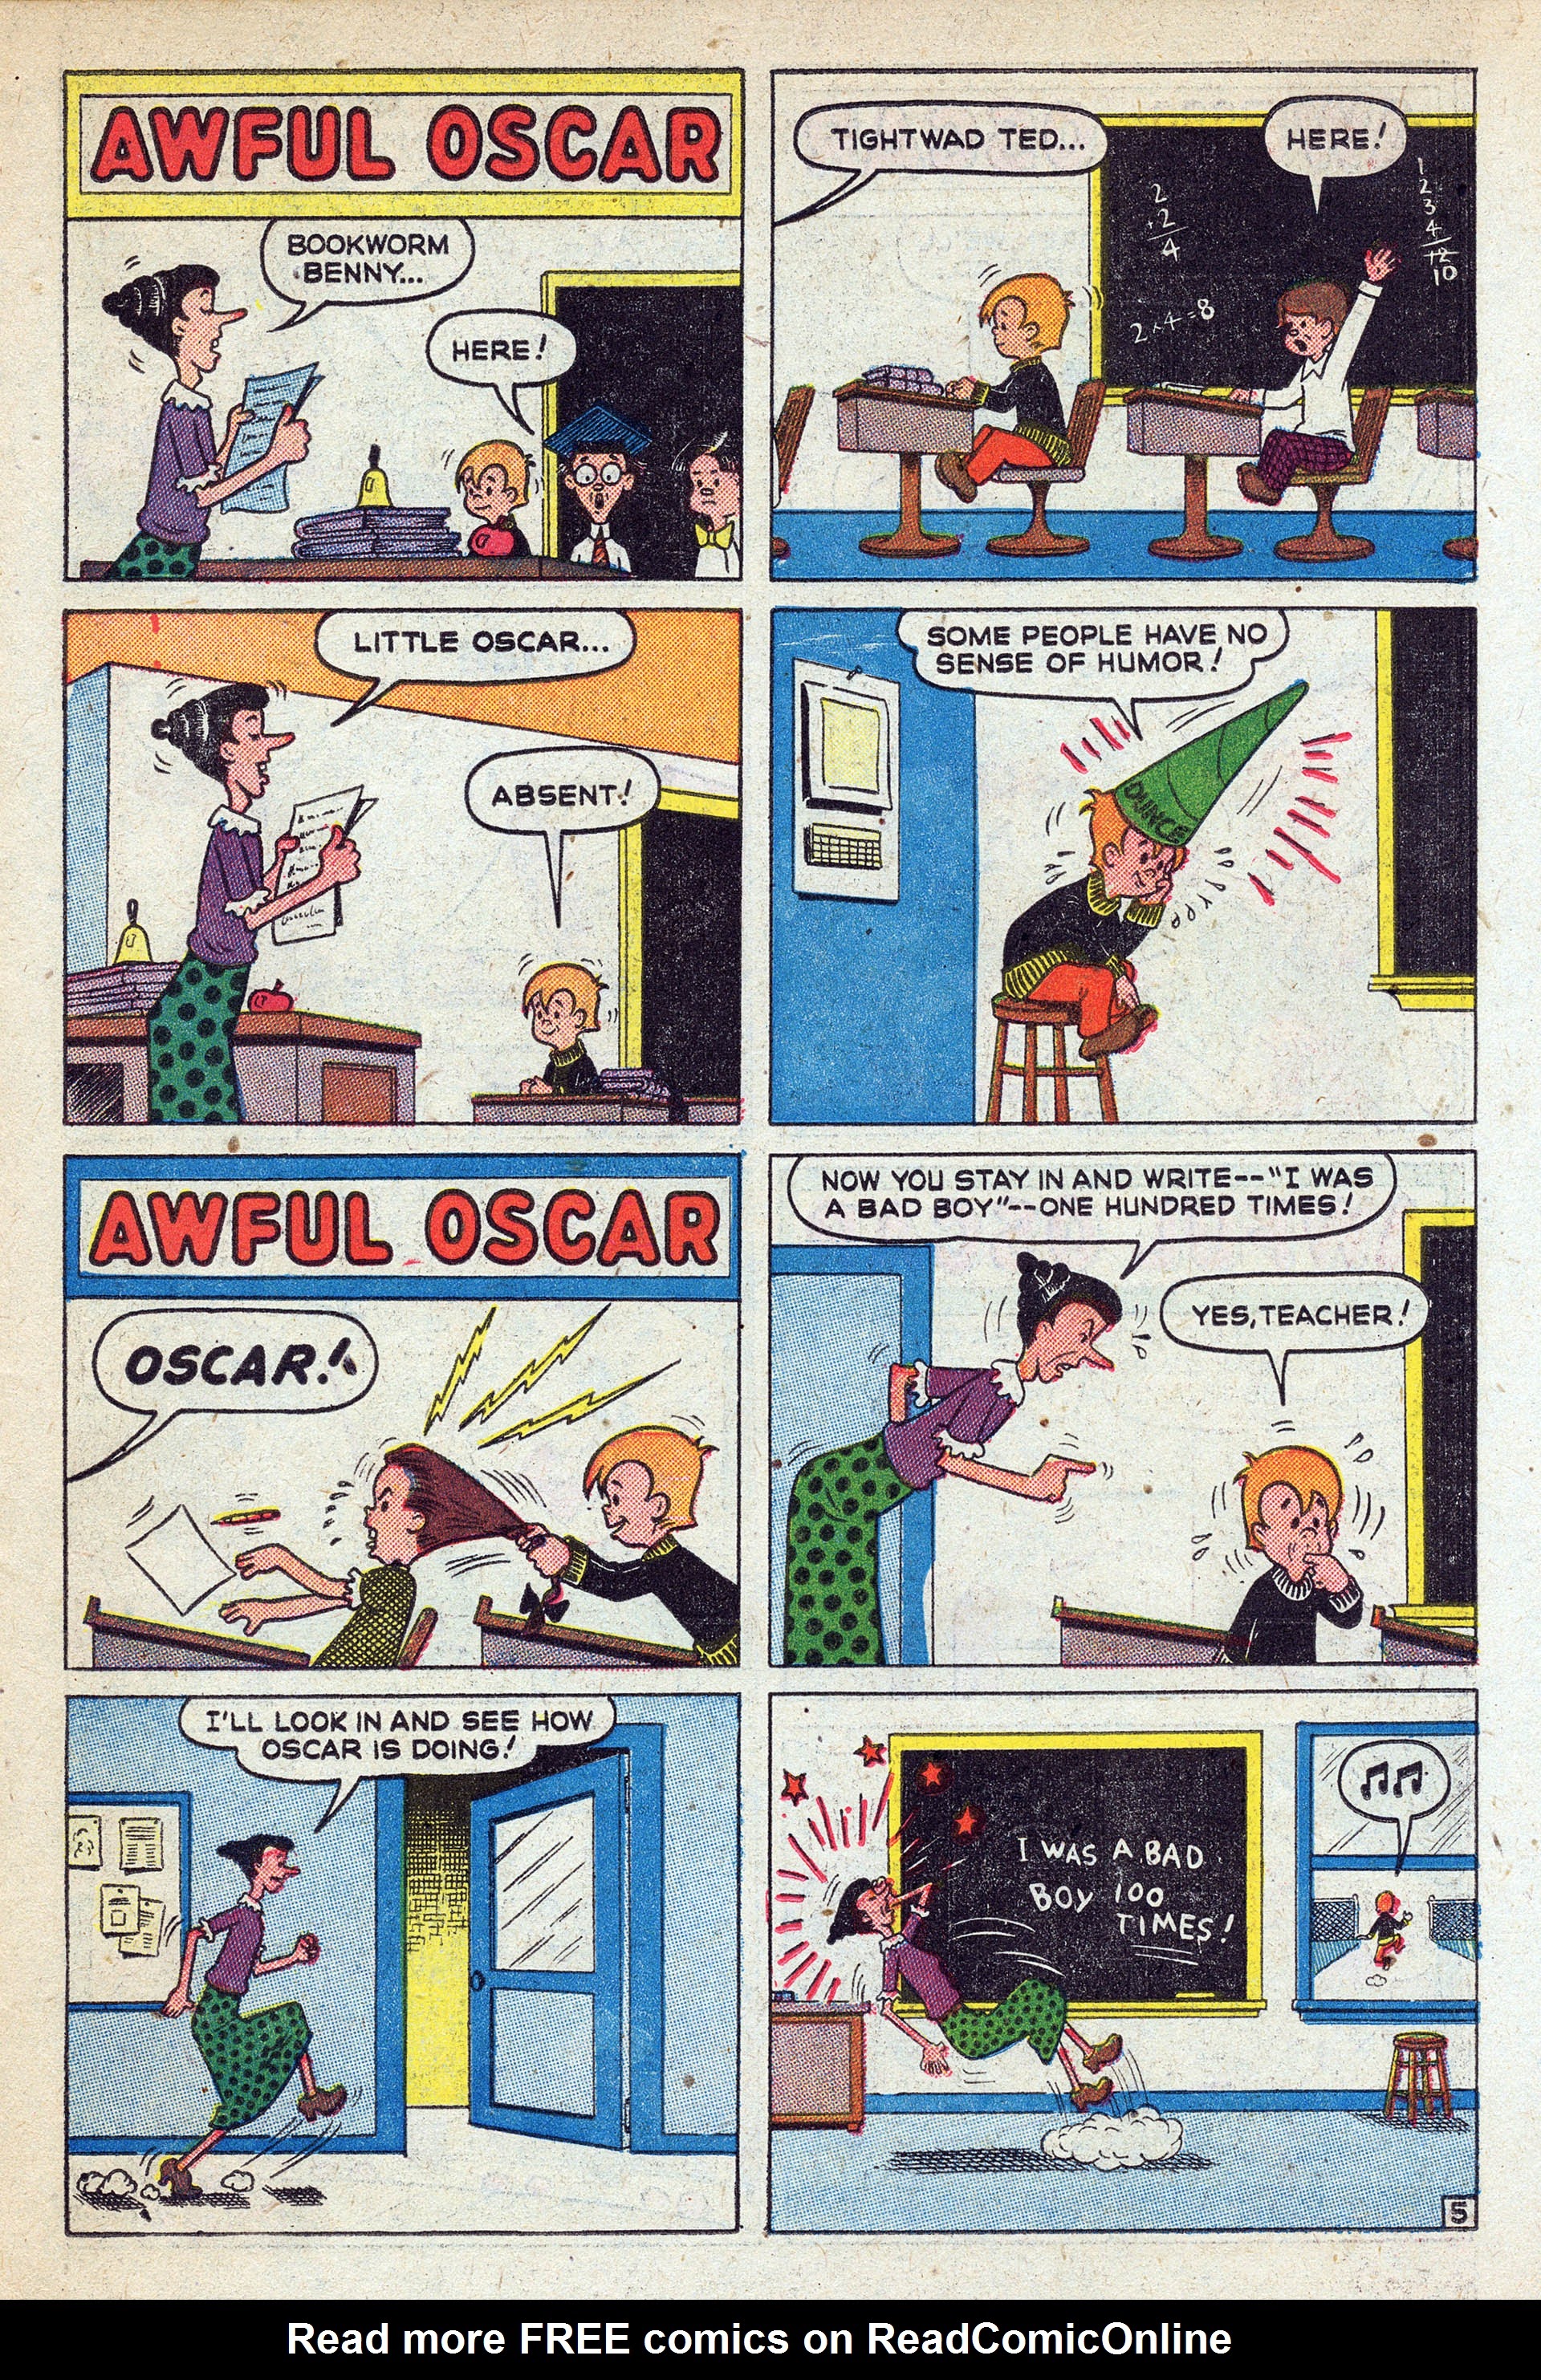 Read online Awful Oscar comic -  Issue #11 - 25